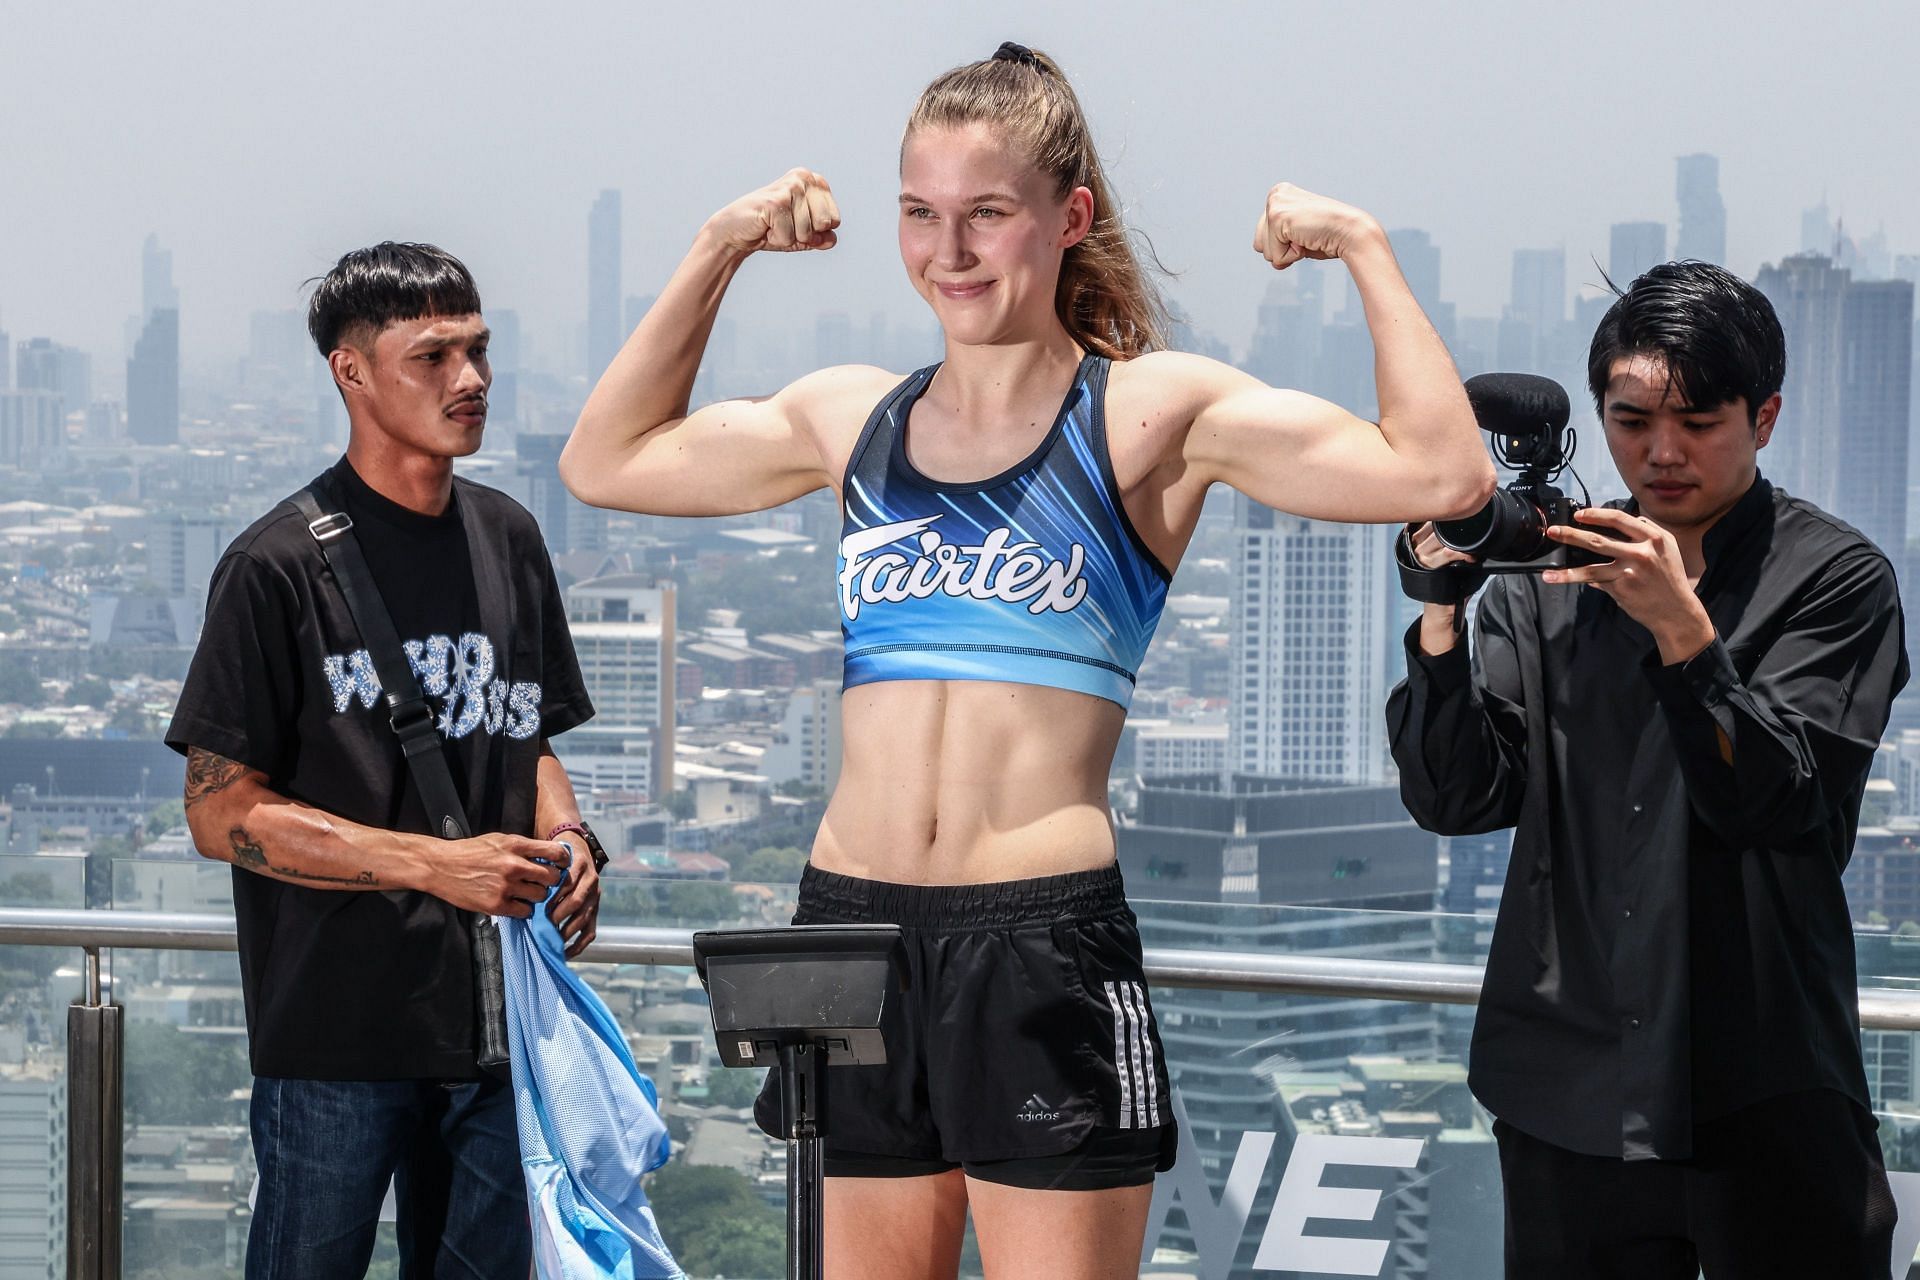 Smilla Sundell missed weight and lost her strawweight belt on the scale ahead of ONE Fight Night 22.